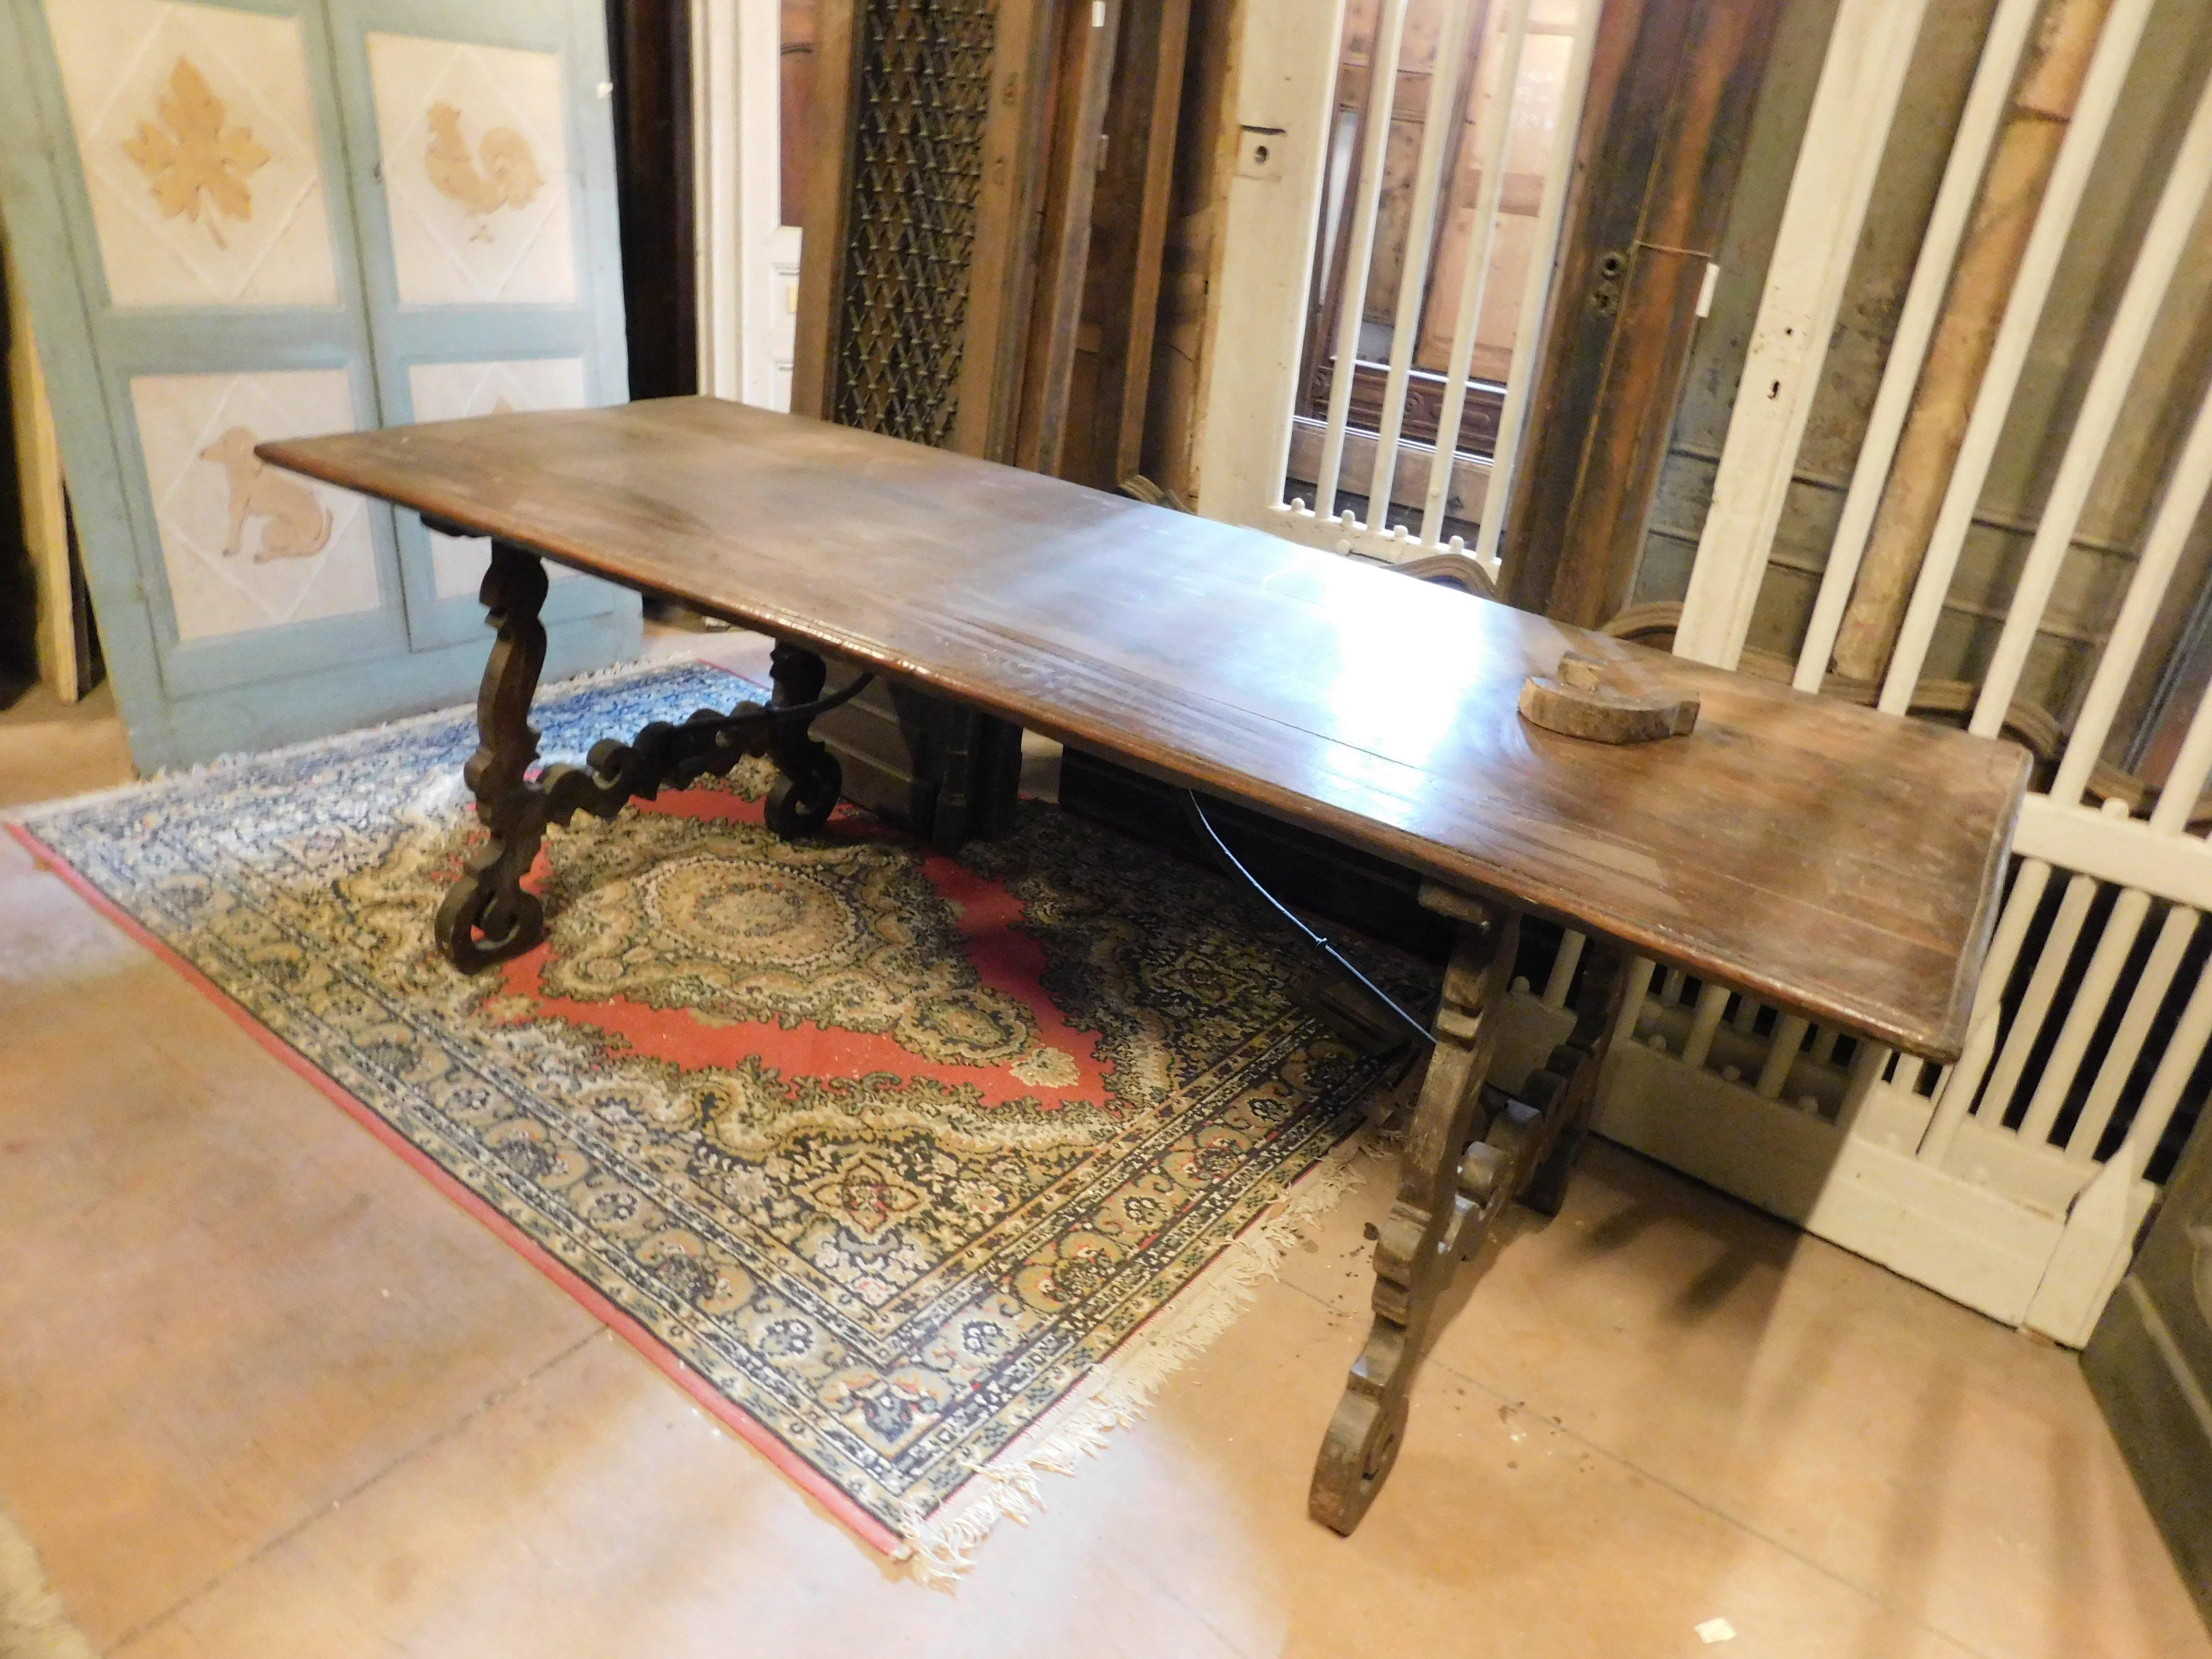 Antique Fratino table in solid walnut, very rich with wavy legs and iron table base, built in the early 1800s in Italy, in the style of the Spanish ones.
Beautiful as a dining table or as a side table, perhaps in contrast in a modern kitchen,